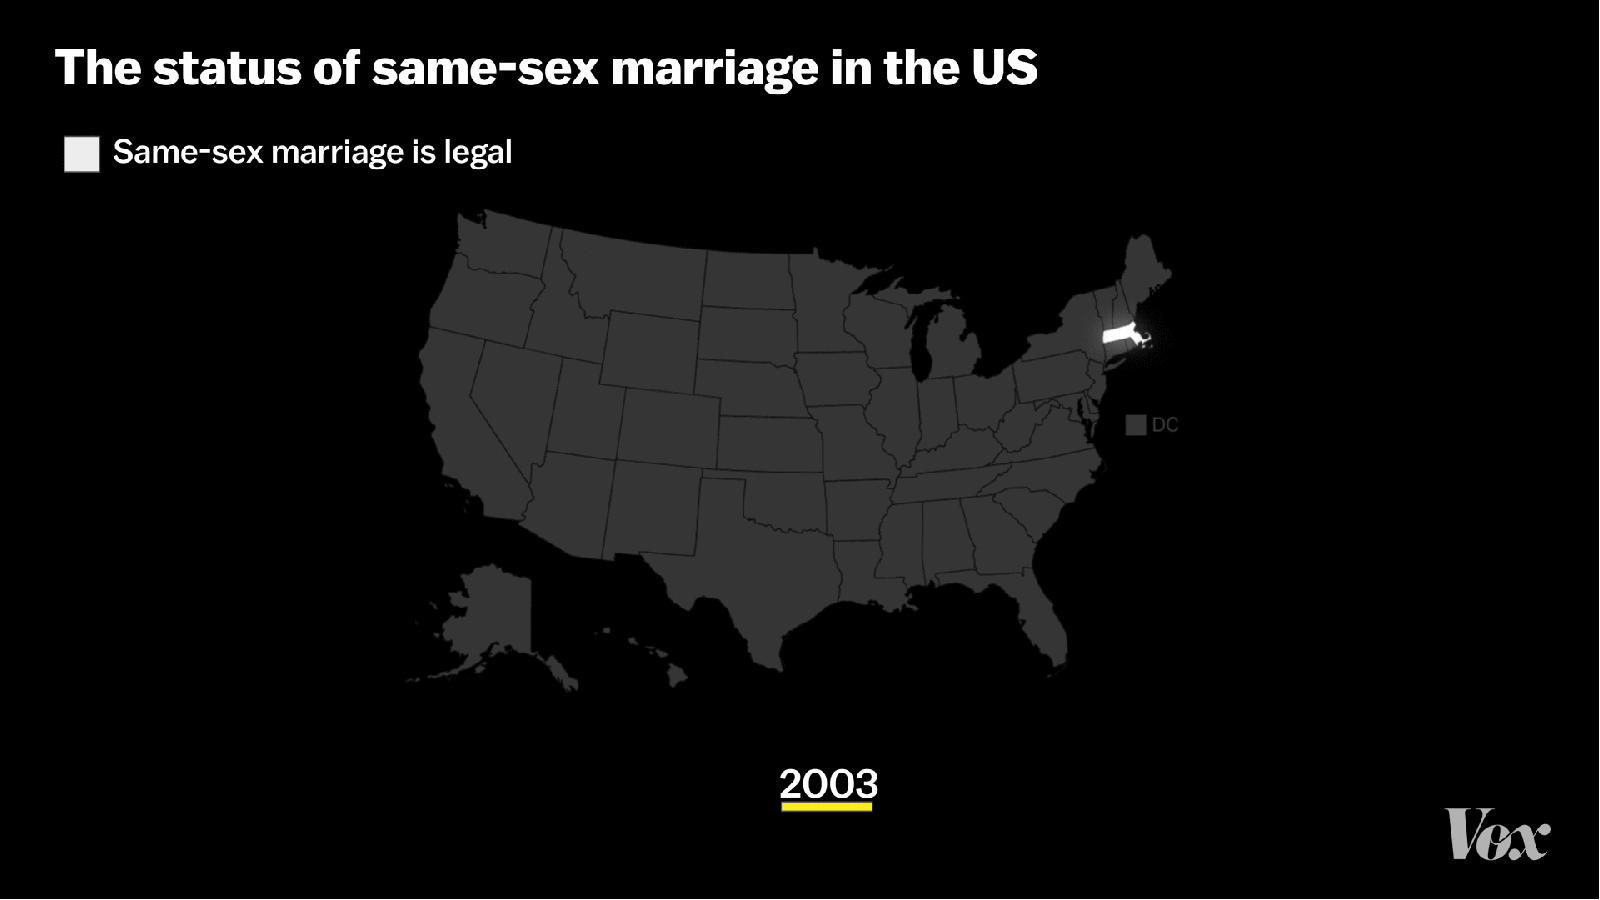 http://www.vox.com/2015/6/26/8851155/marriage-equality-map